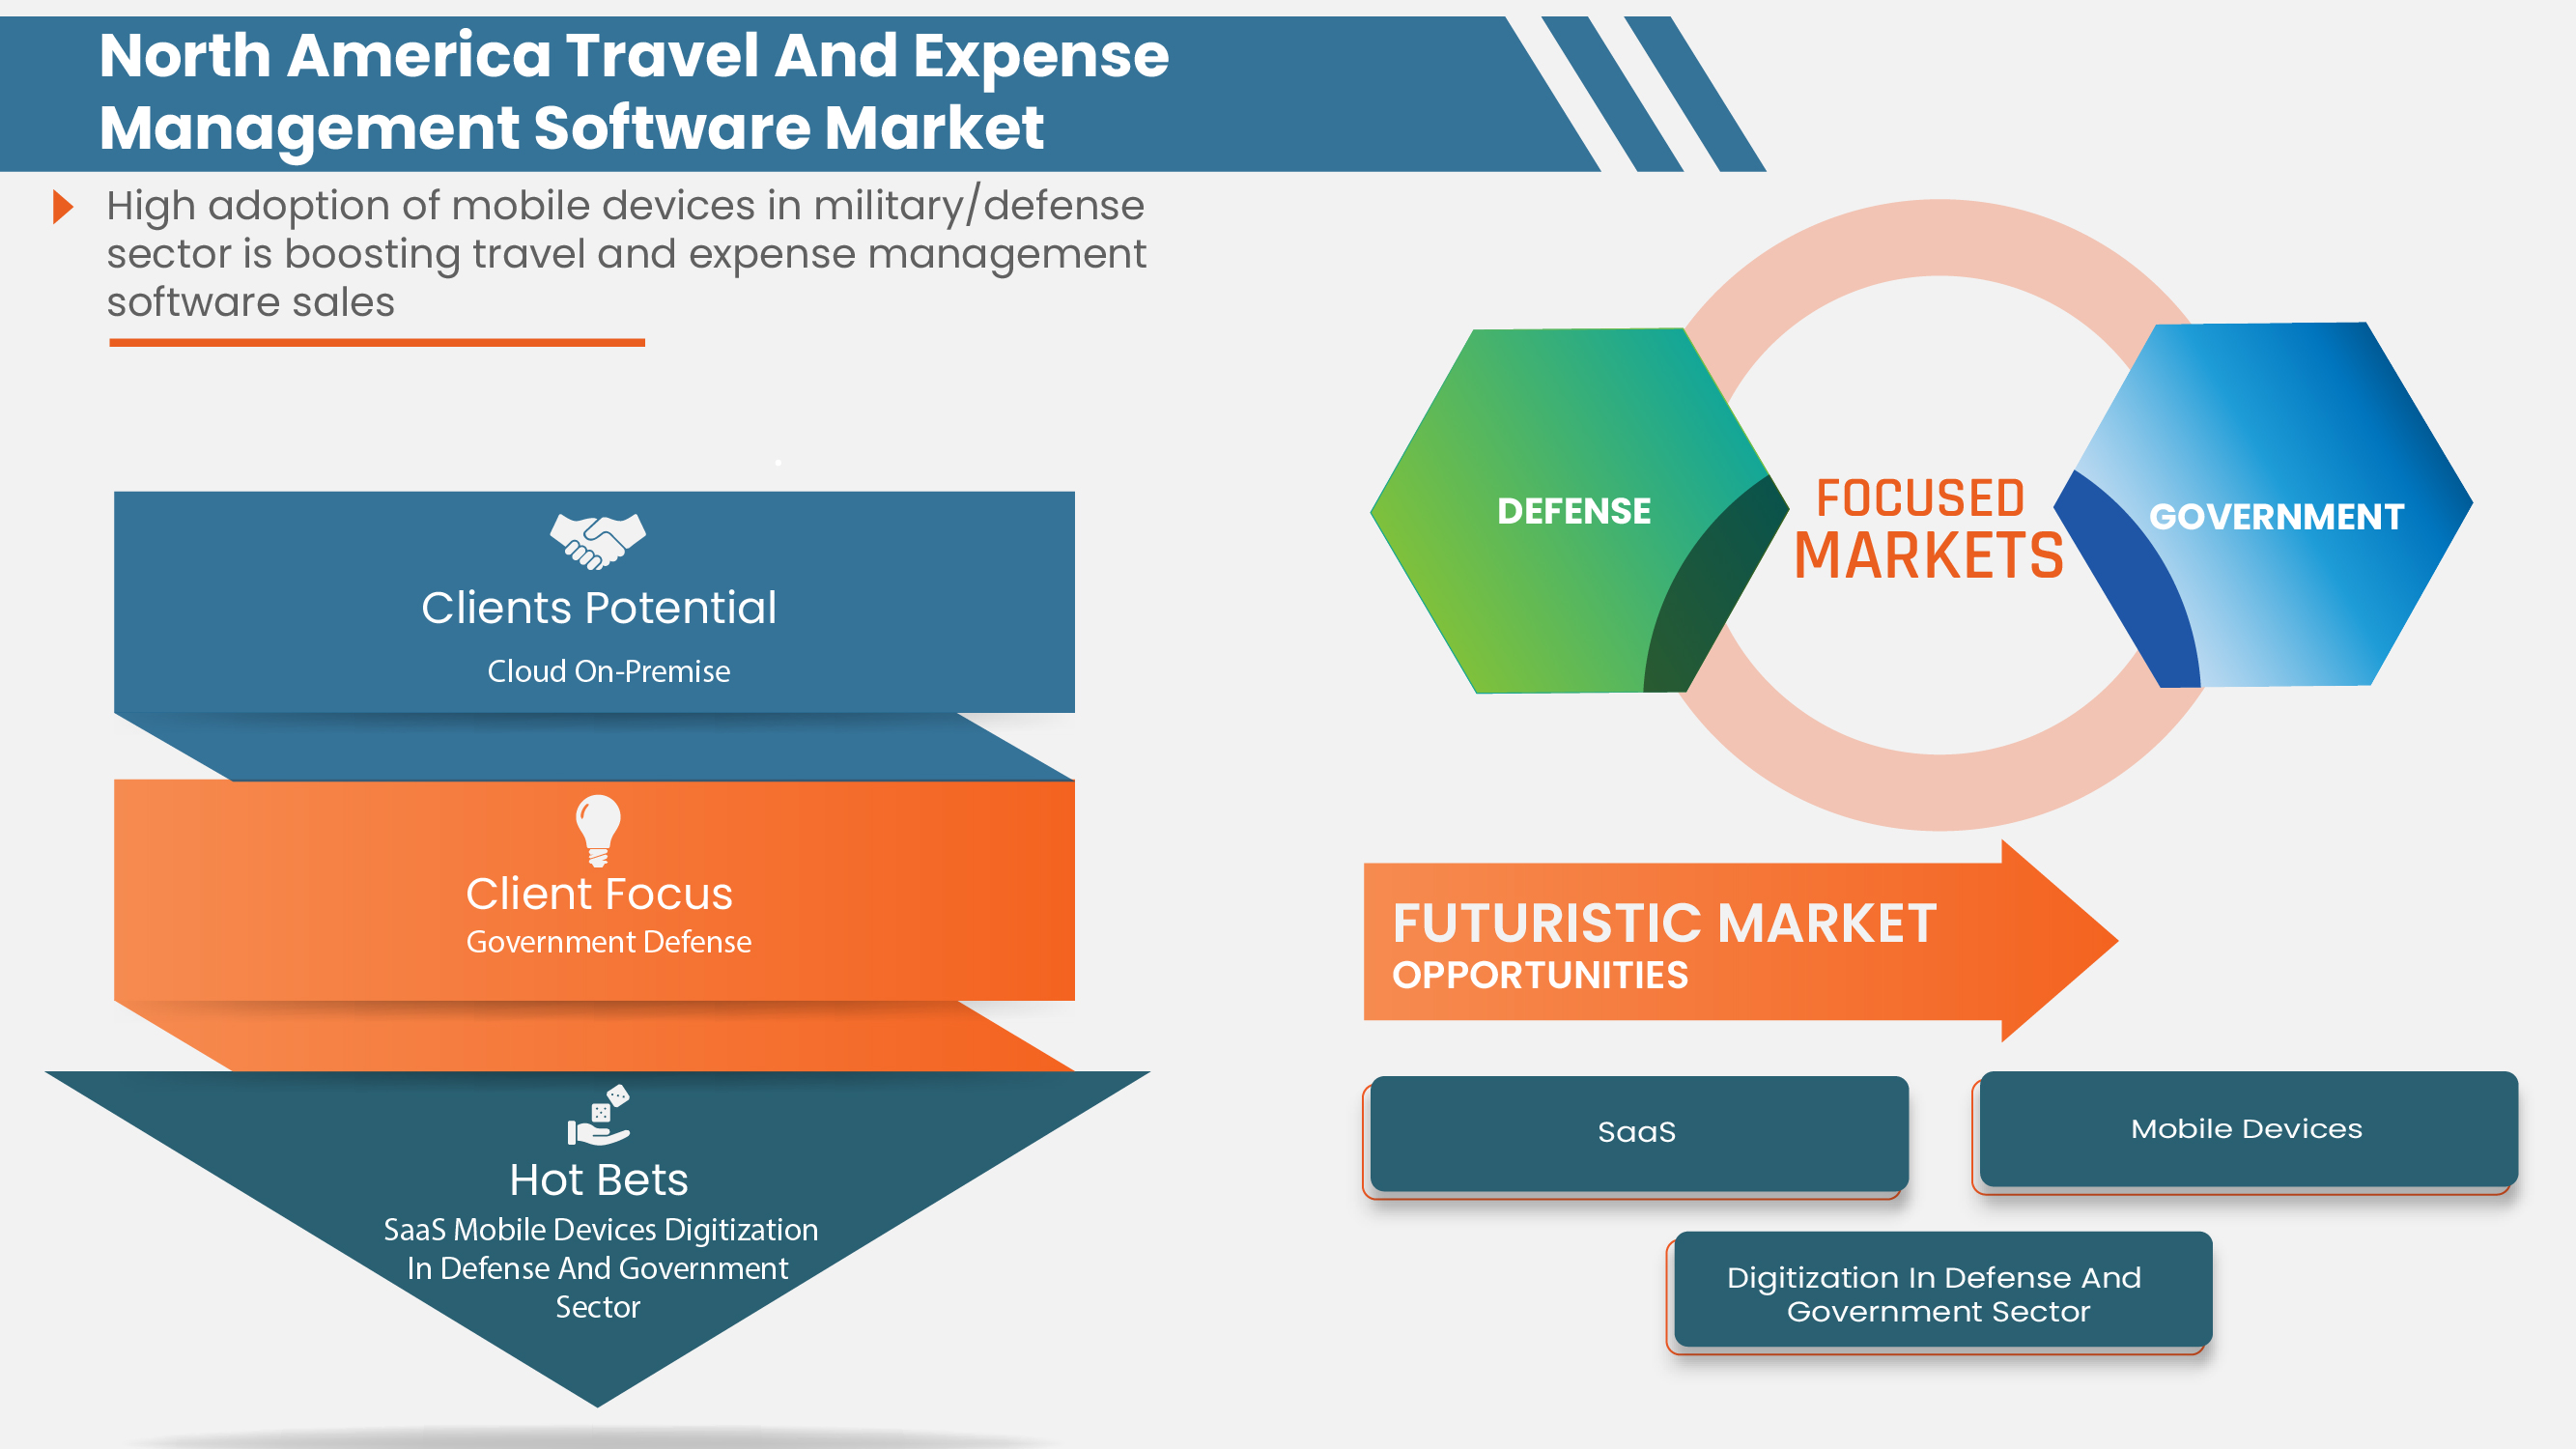 North America Travel and Expense Management Software Market